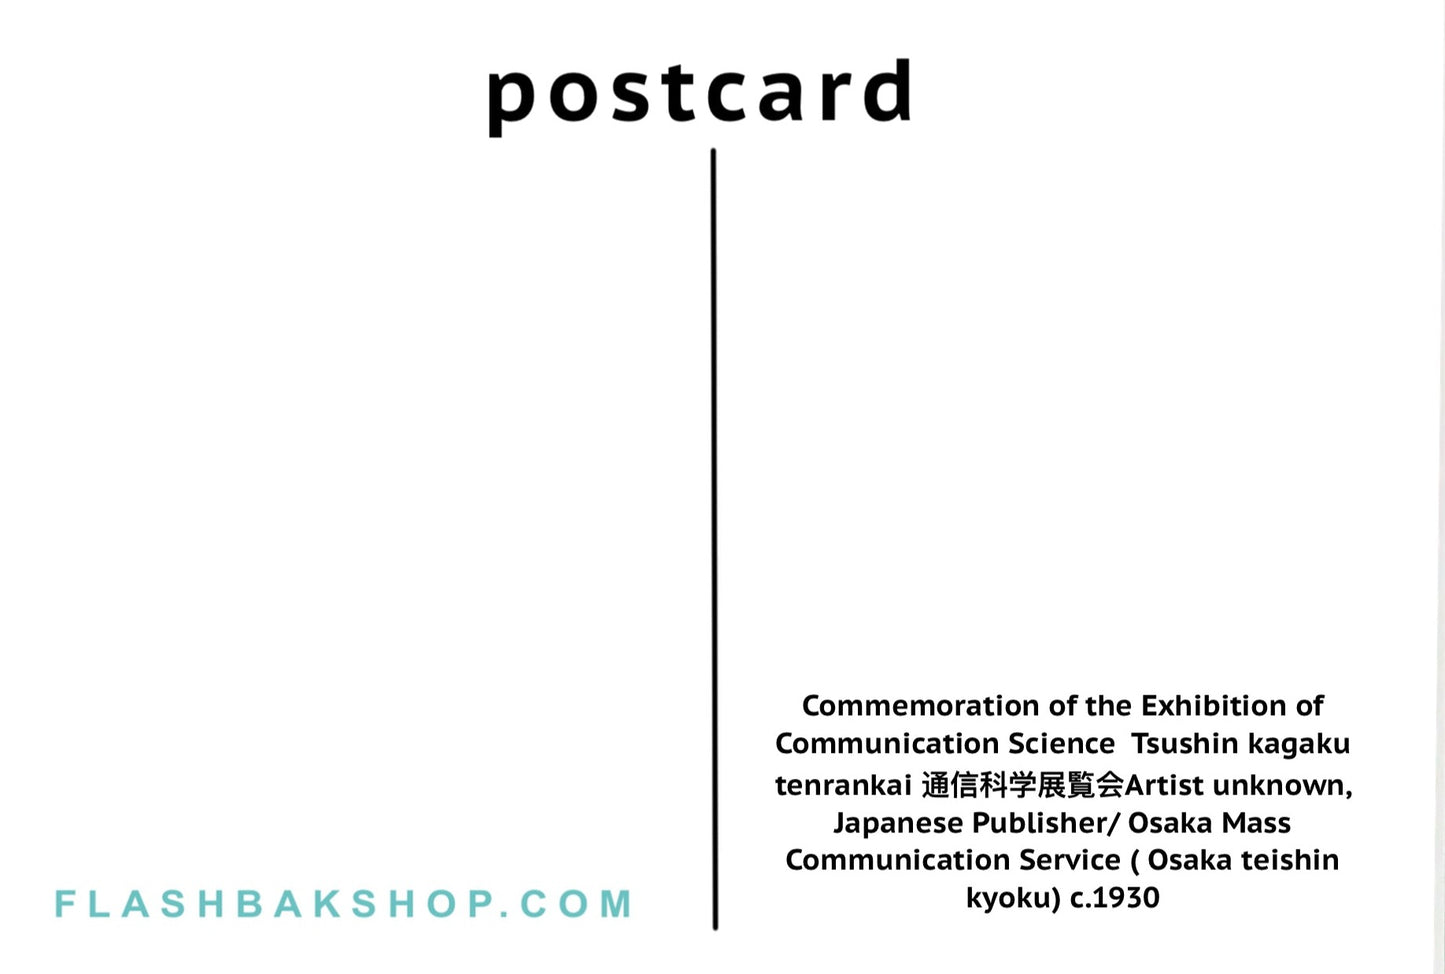 Commemoration of the Exhibition of Communication Science, c.1930 - Postcard